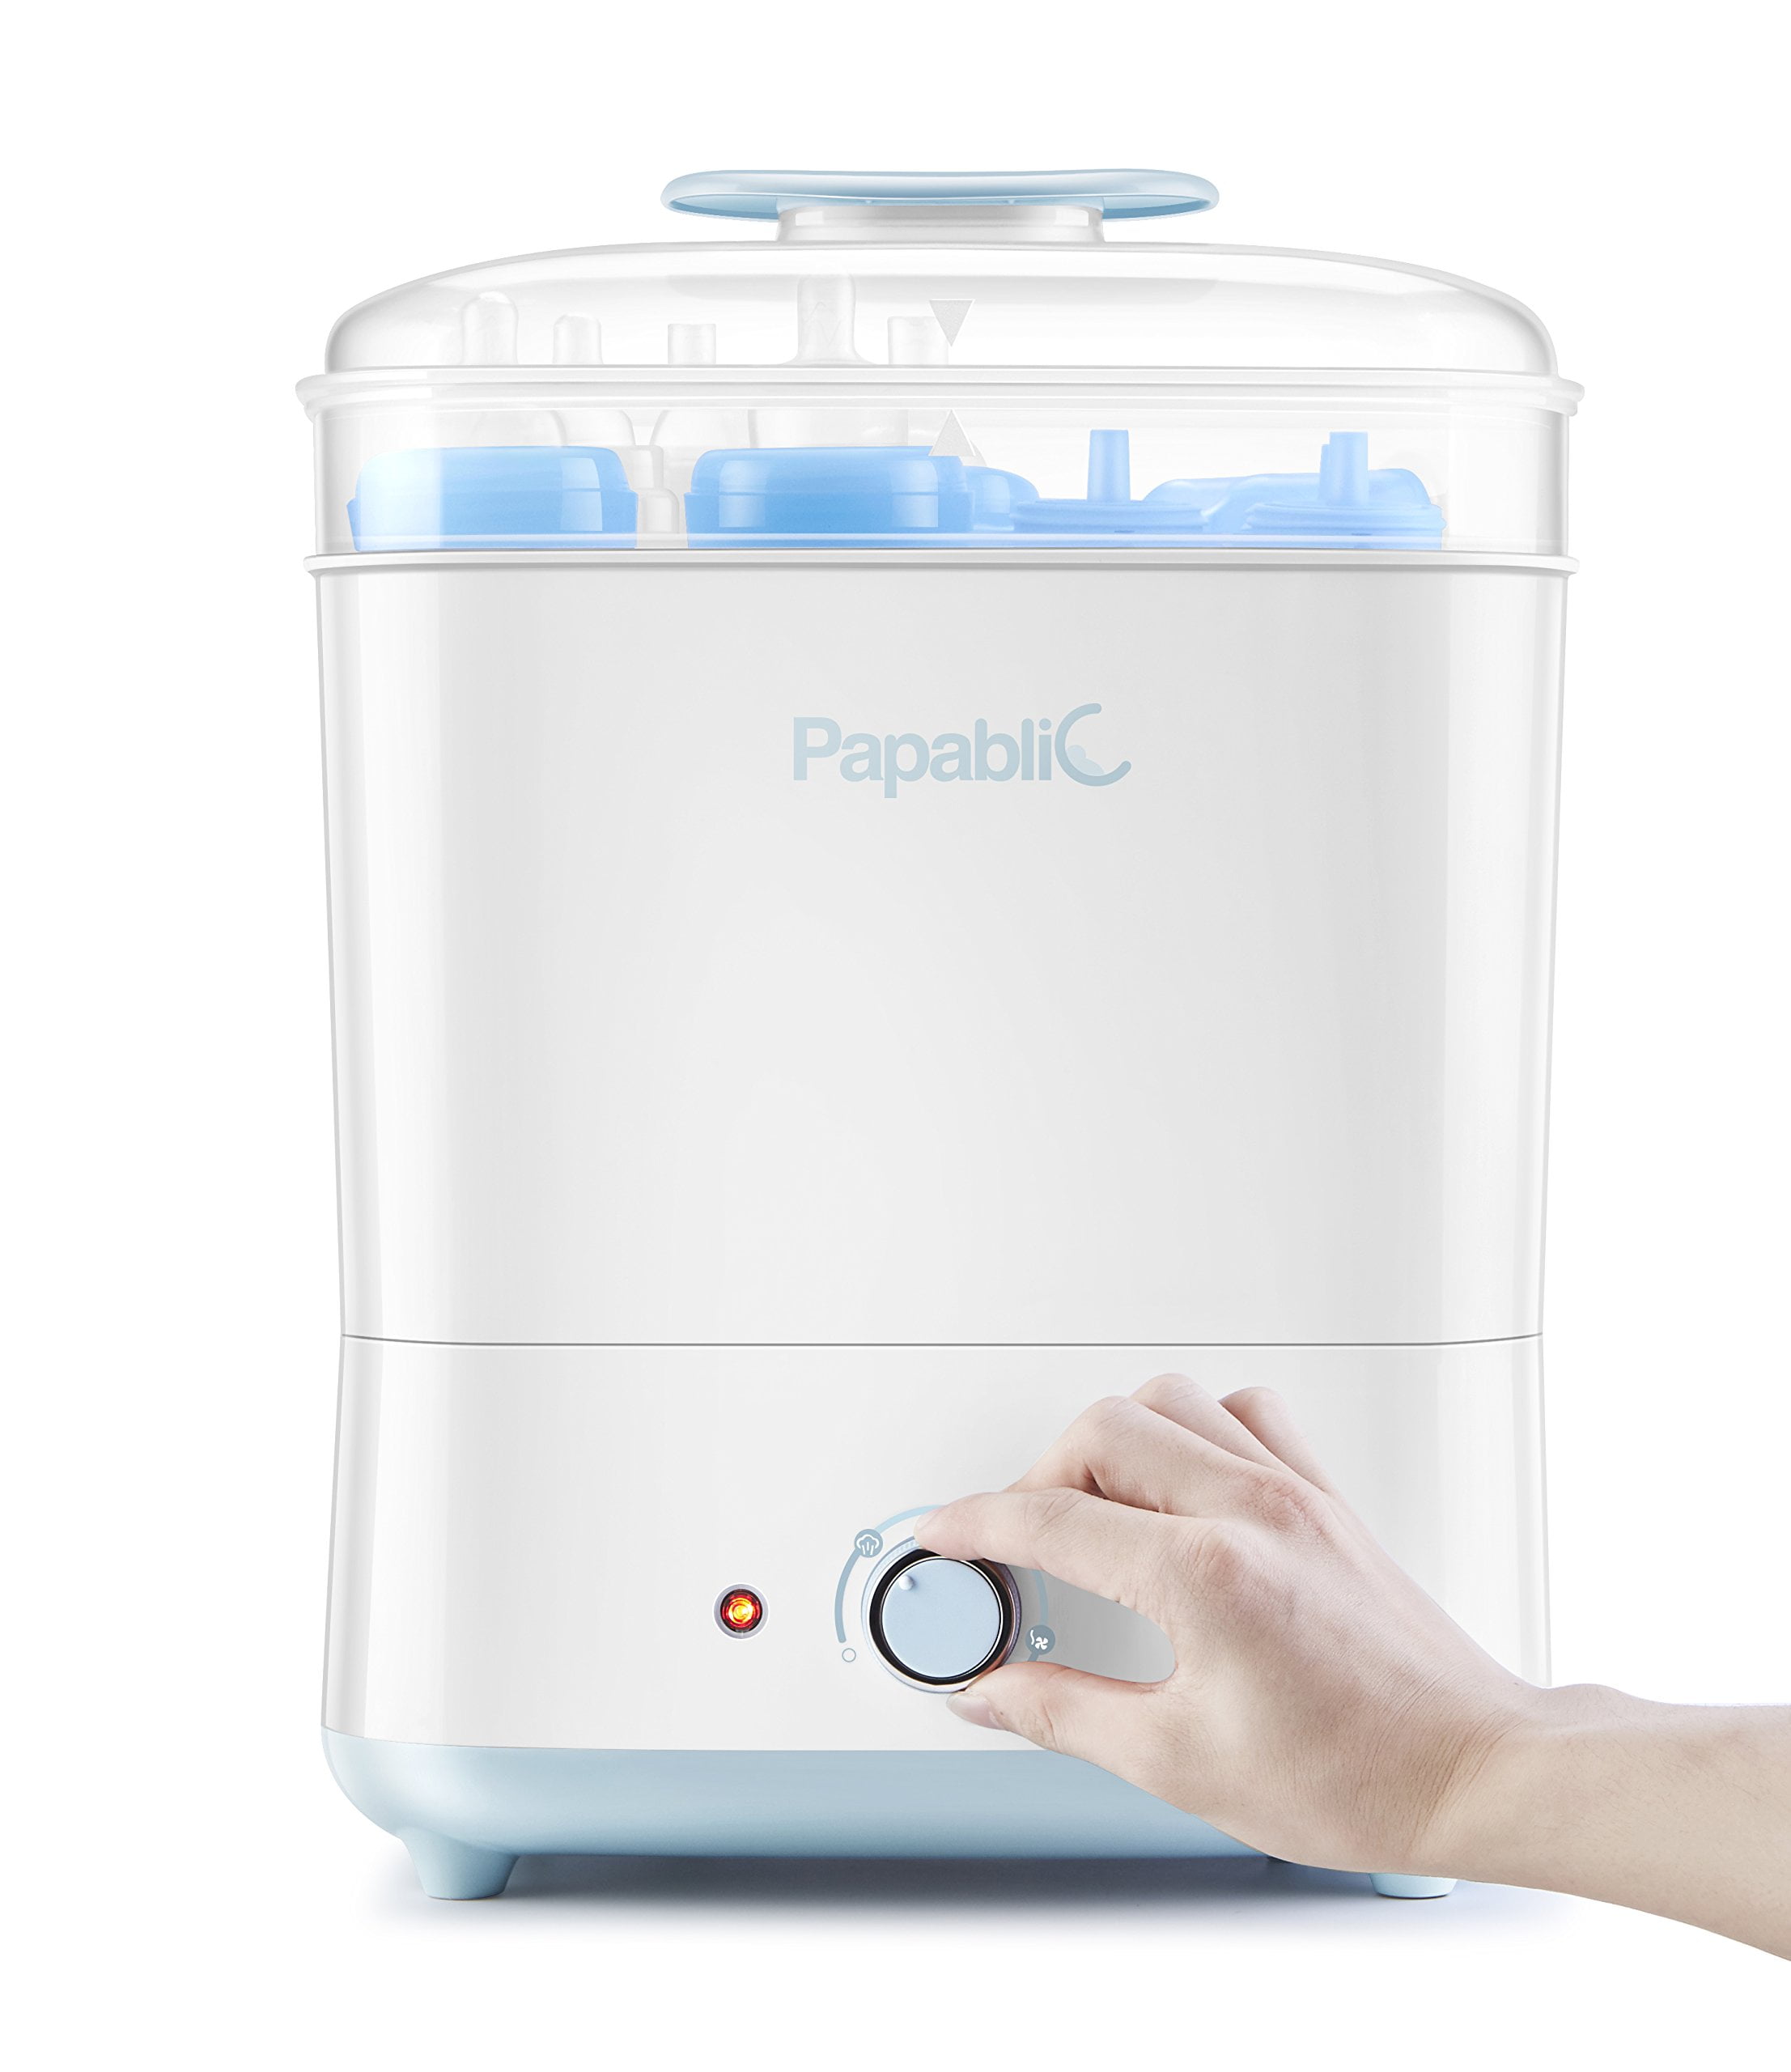 Papablic Baby Bottle Electric Steam Sterilizer and Dryer review